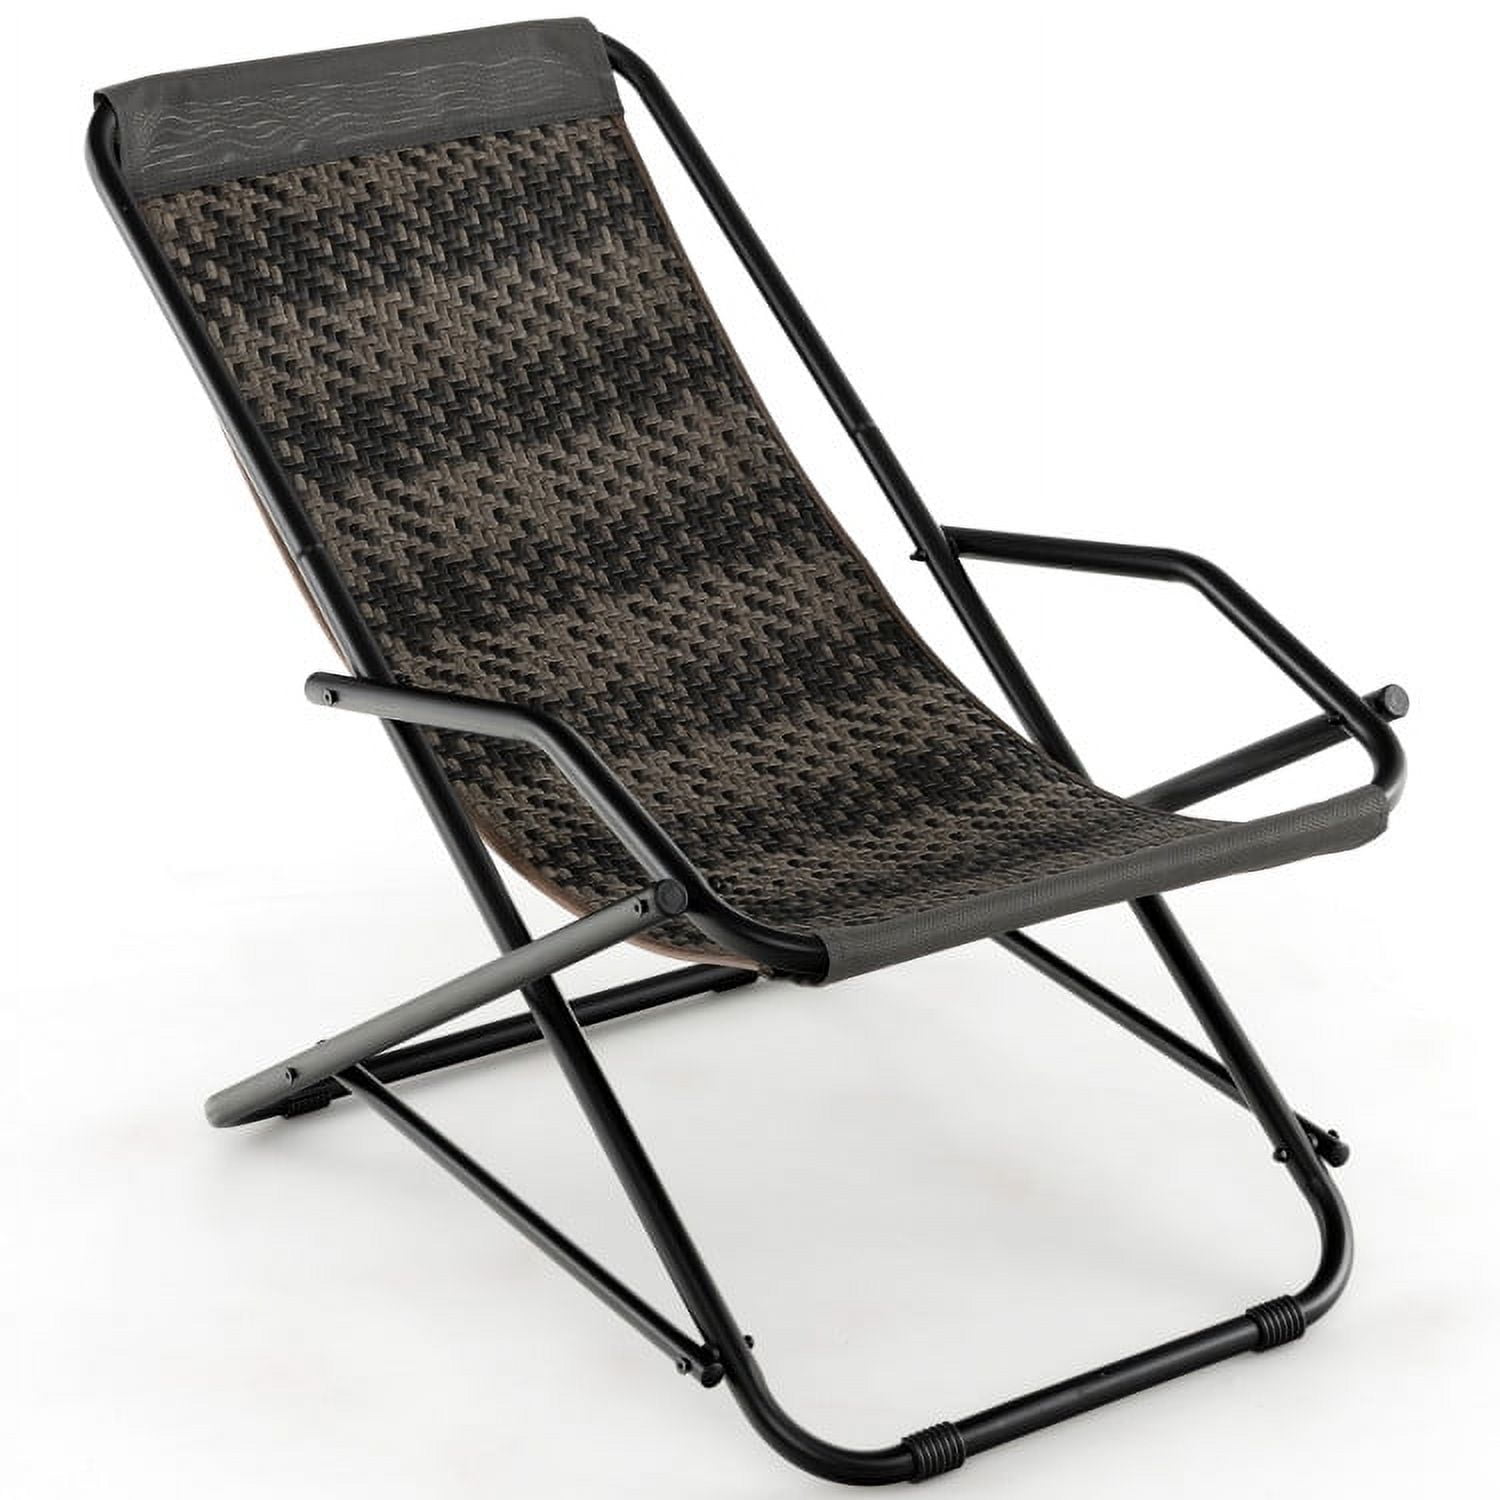 Aimee Lii Outdoor Folding Lounge Recliner, Lounge Chair Outdoor, Sturdy, Movable, A-Gray